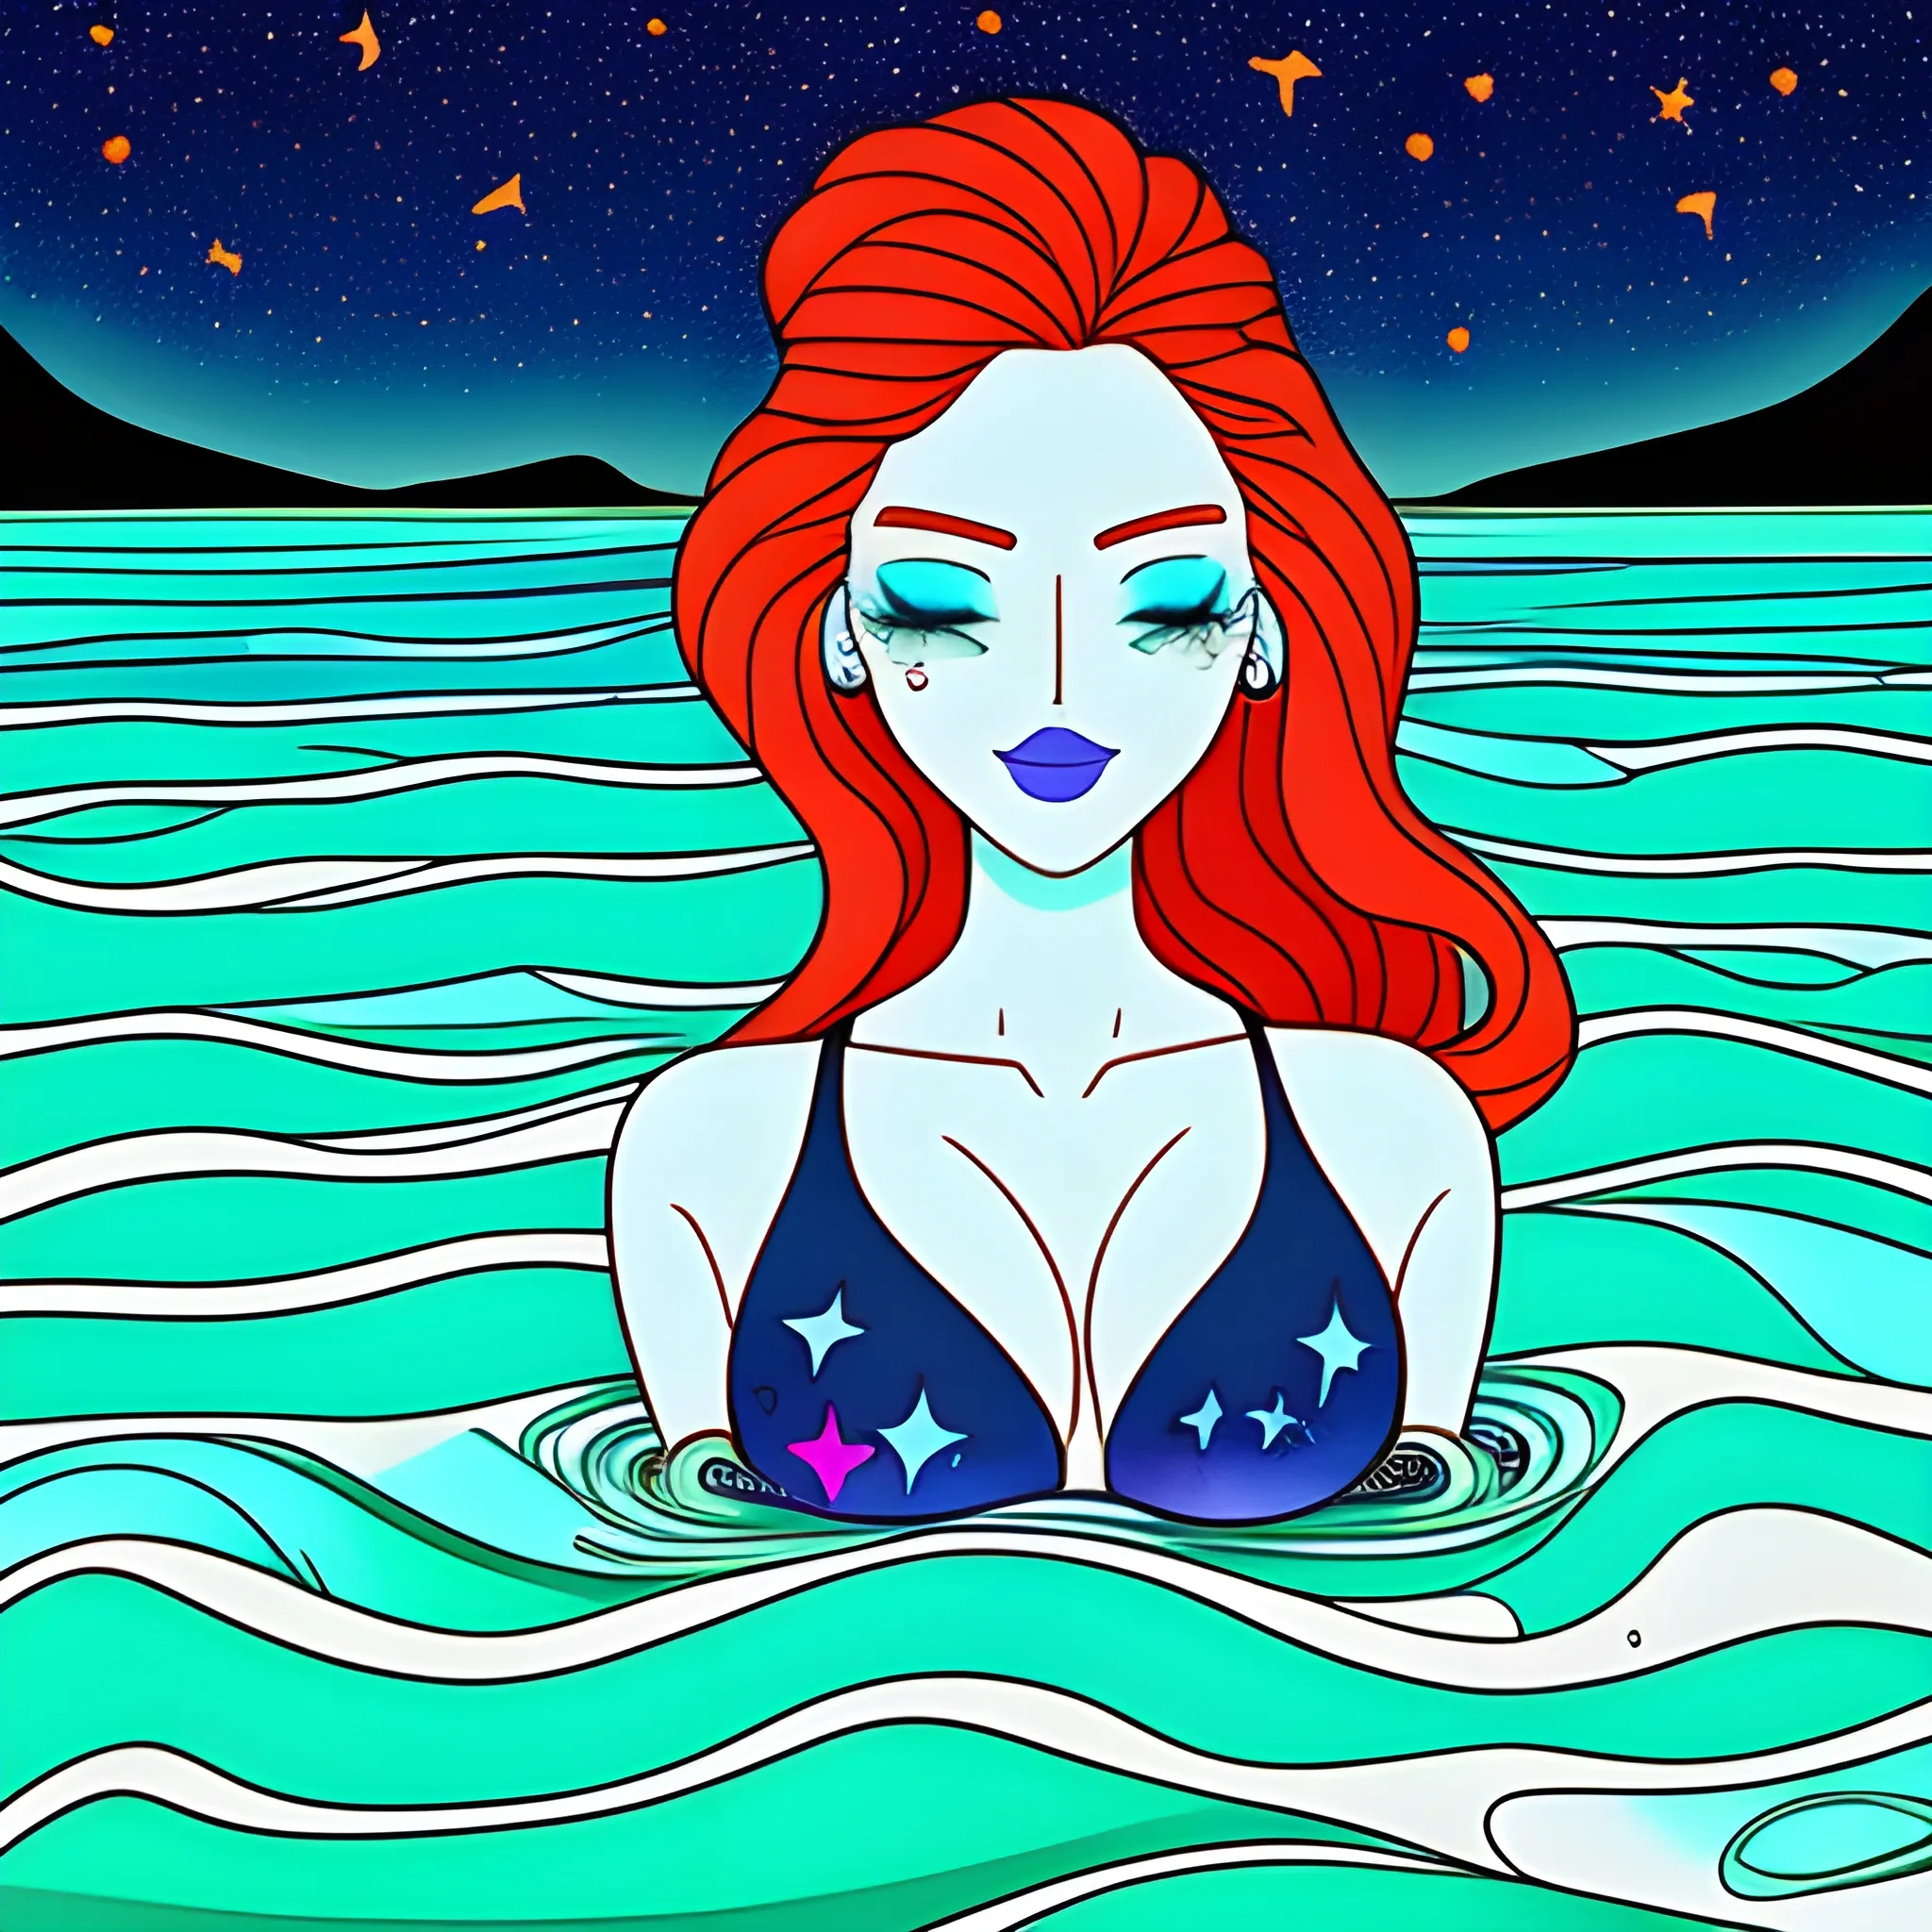 illustration, best quality, colorful, line art, flat colors, Girl, 18 years old, redhead, long hair, hair tied back, pretty face, perfect face, The Sea of ​​Stars, An isolated beach that comes alive at night. Bioluminescent microorganisms in the water transform the sea into a sparkling carpet of stars, illuminating every step taken on the sand and providing a magical and romantic atmosphere, Perfect mouth, perfect eyes, perfect face